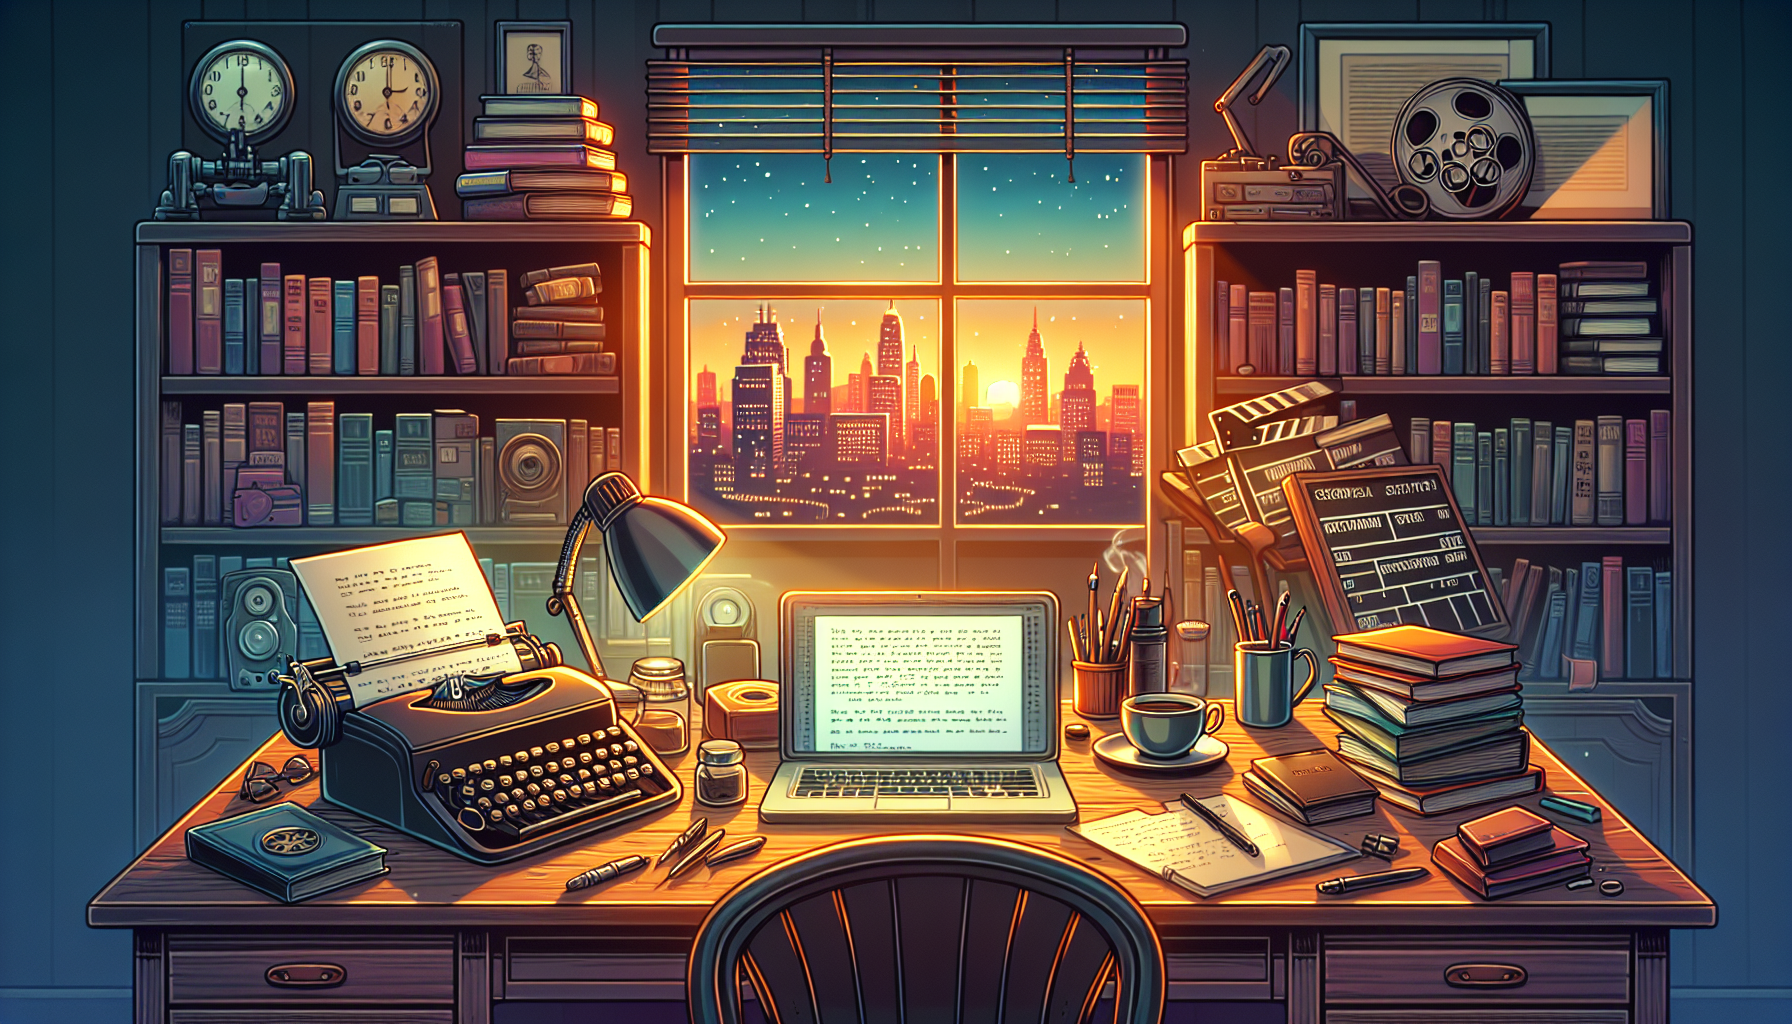 A cozy writer's desk illuminated by soft, warm lighting, filled with stacks of screenplays, notebooks, and a vintage typewriter. The background shows a bookshelf filled with classic movie scripts and